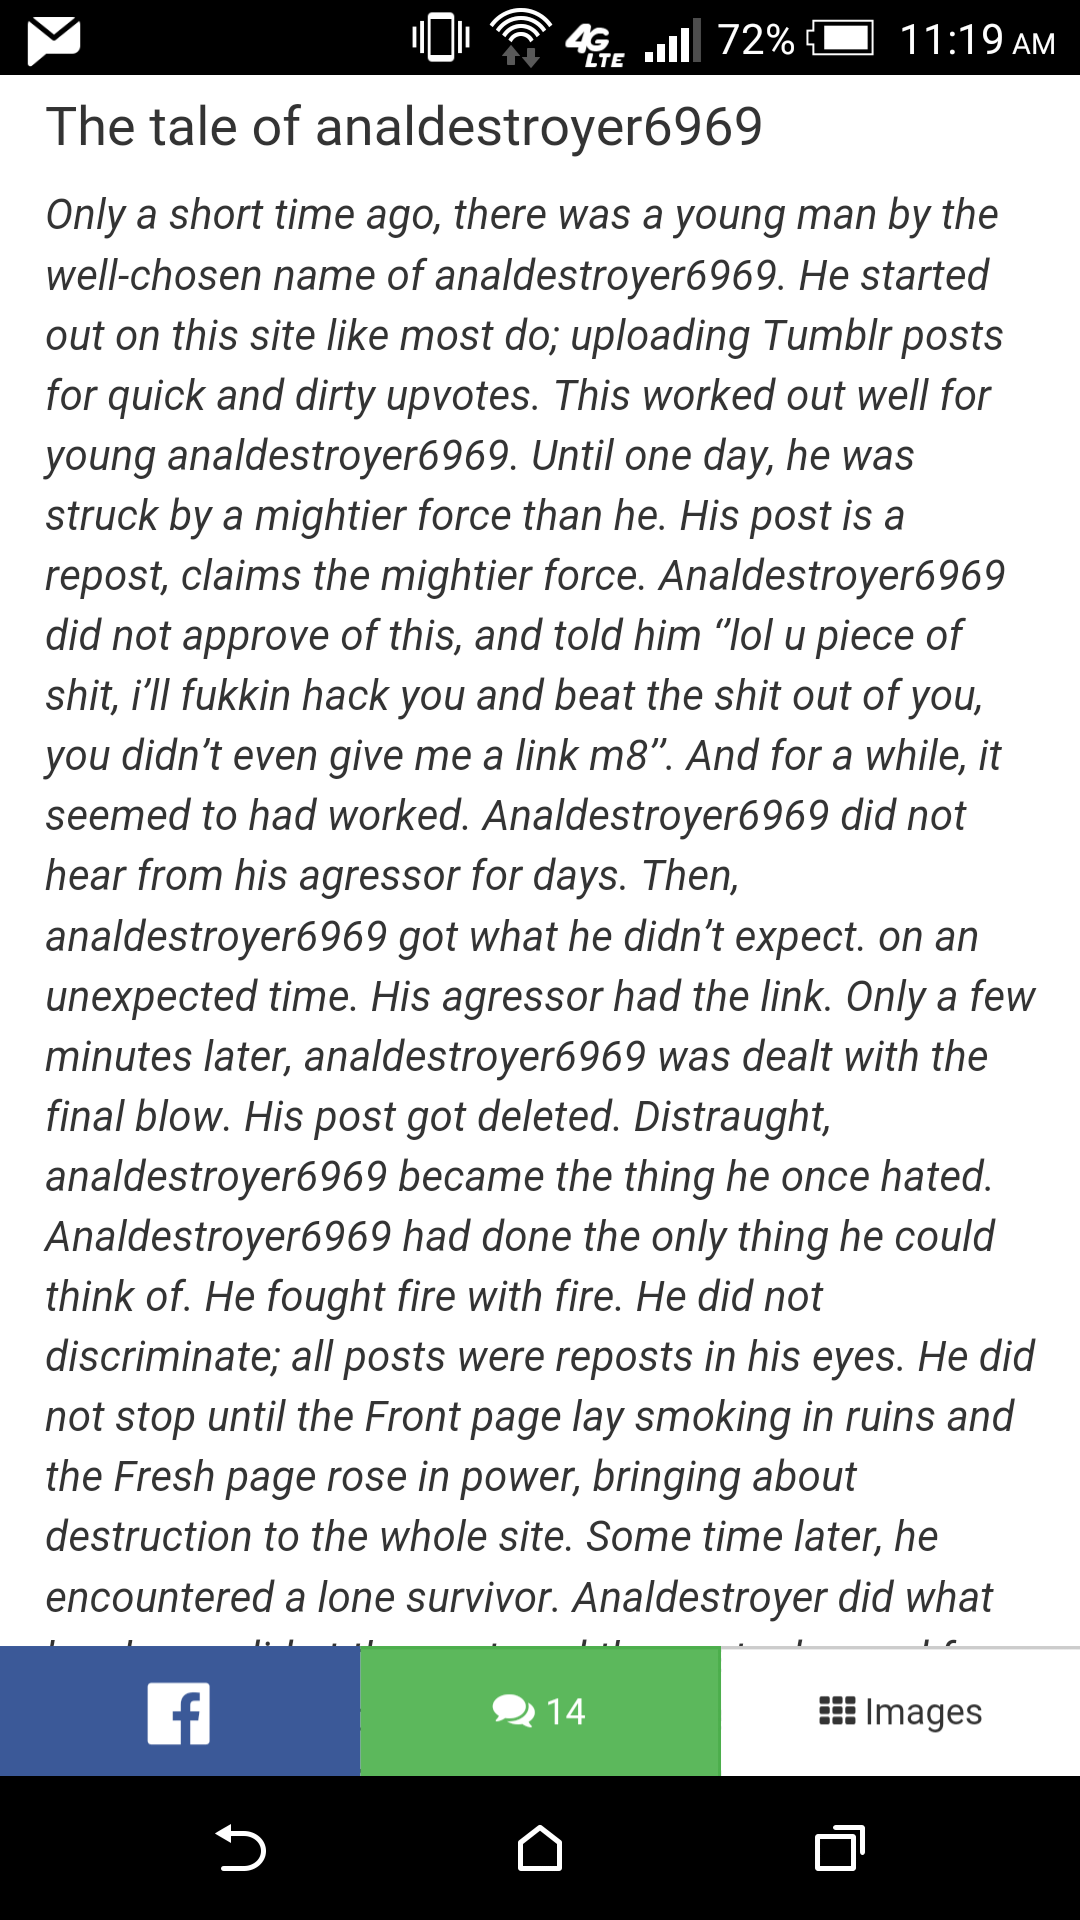 For the new fags, The tale of analdestroyer6969